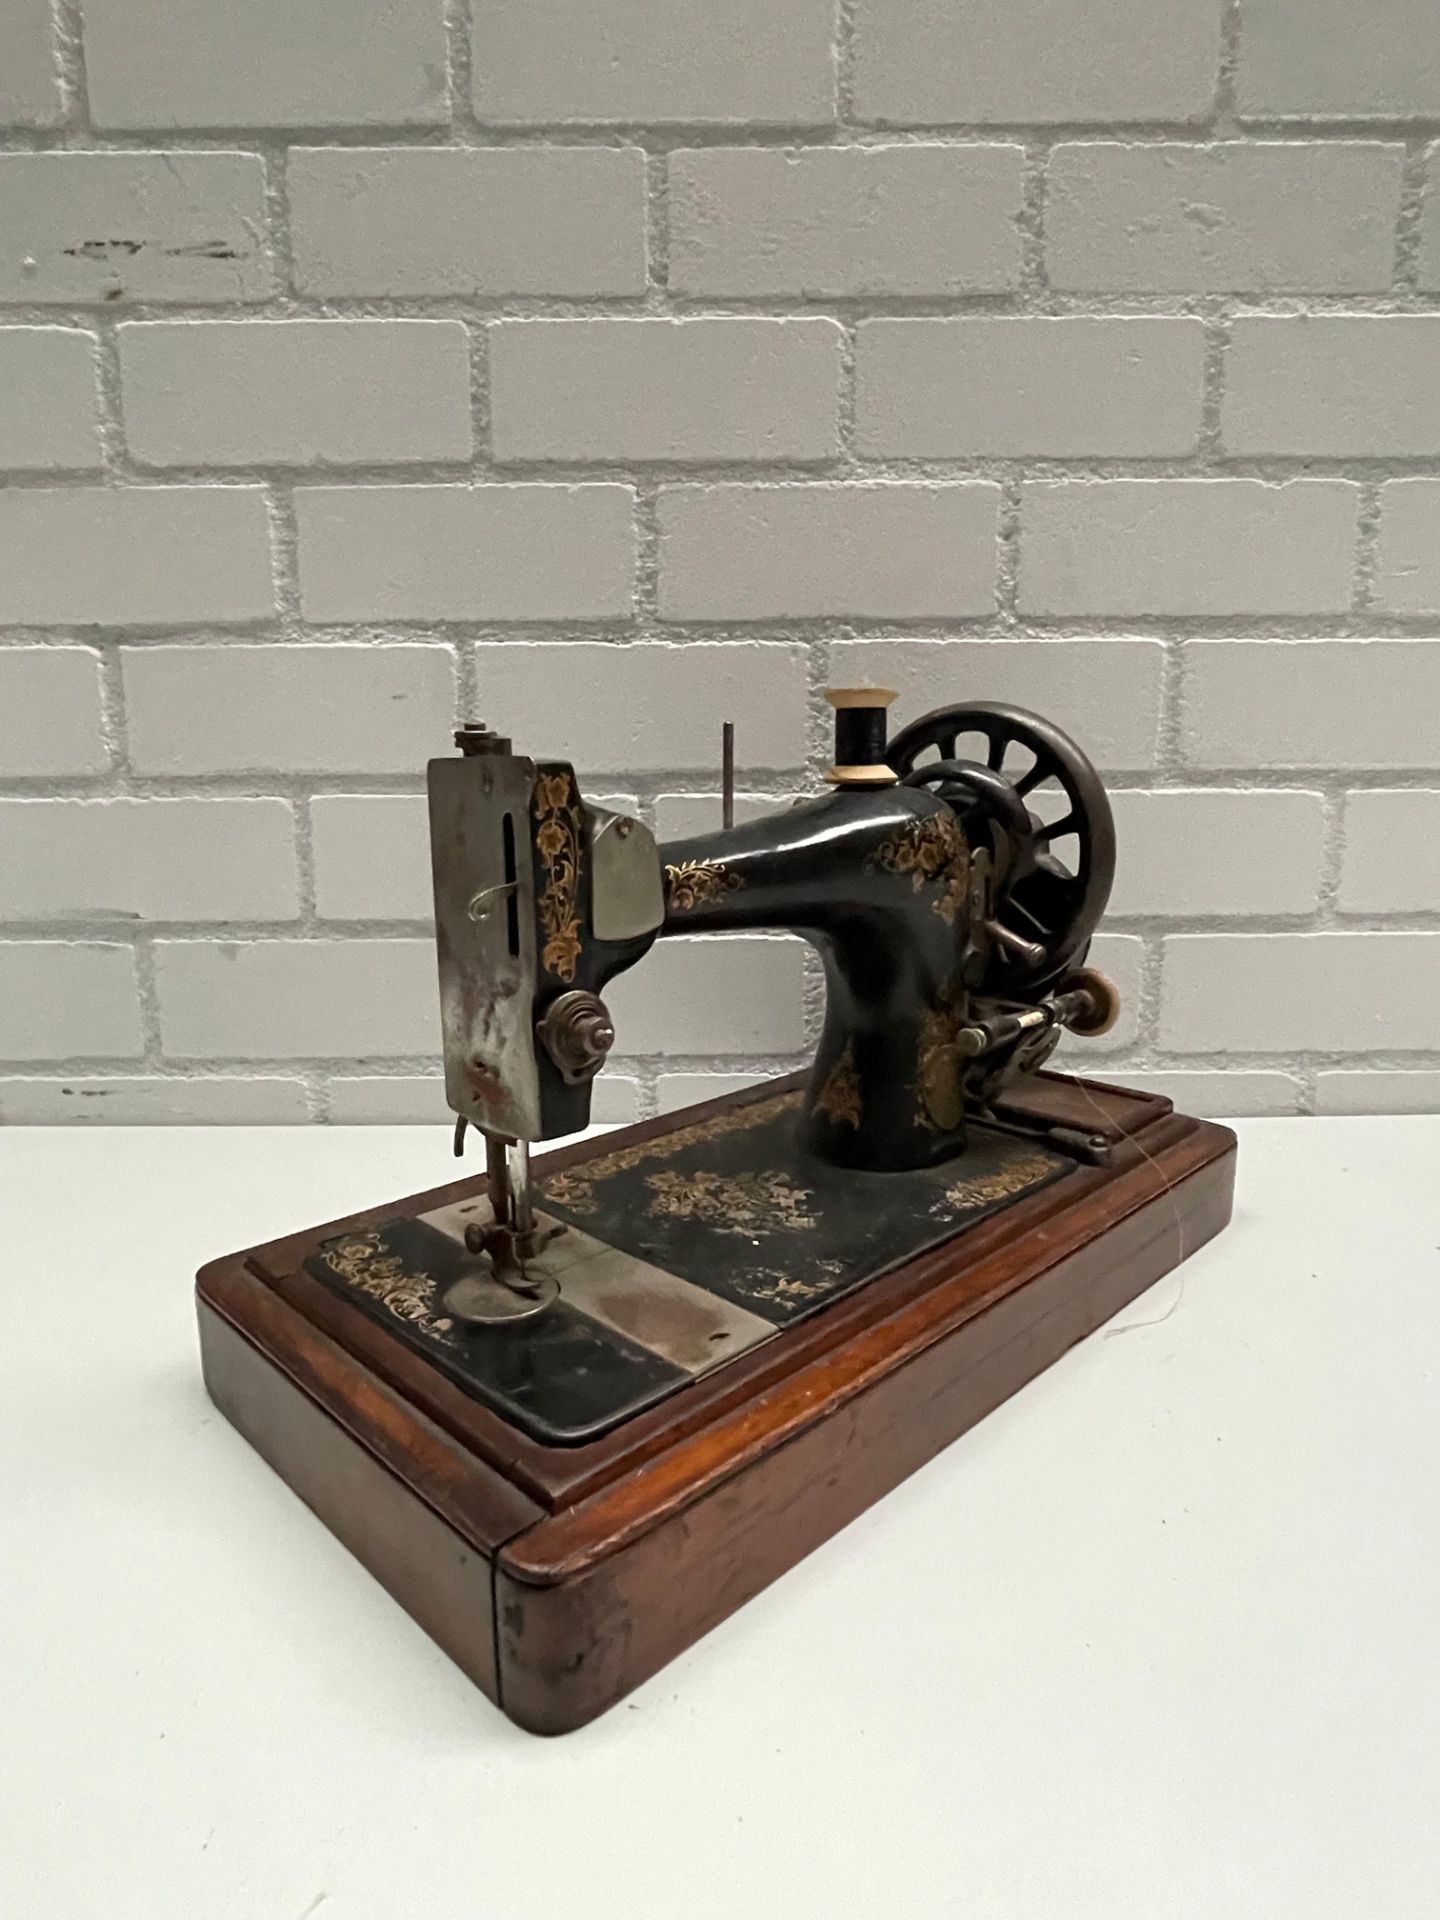 Vintage Cast Iron Sewing Machine - Image 2 of 11